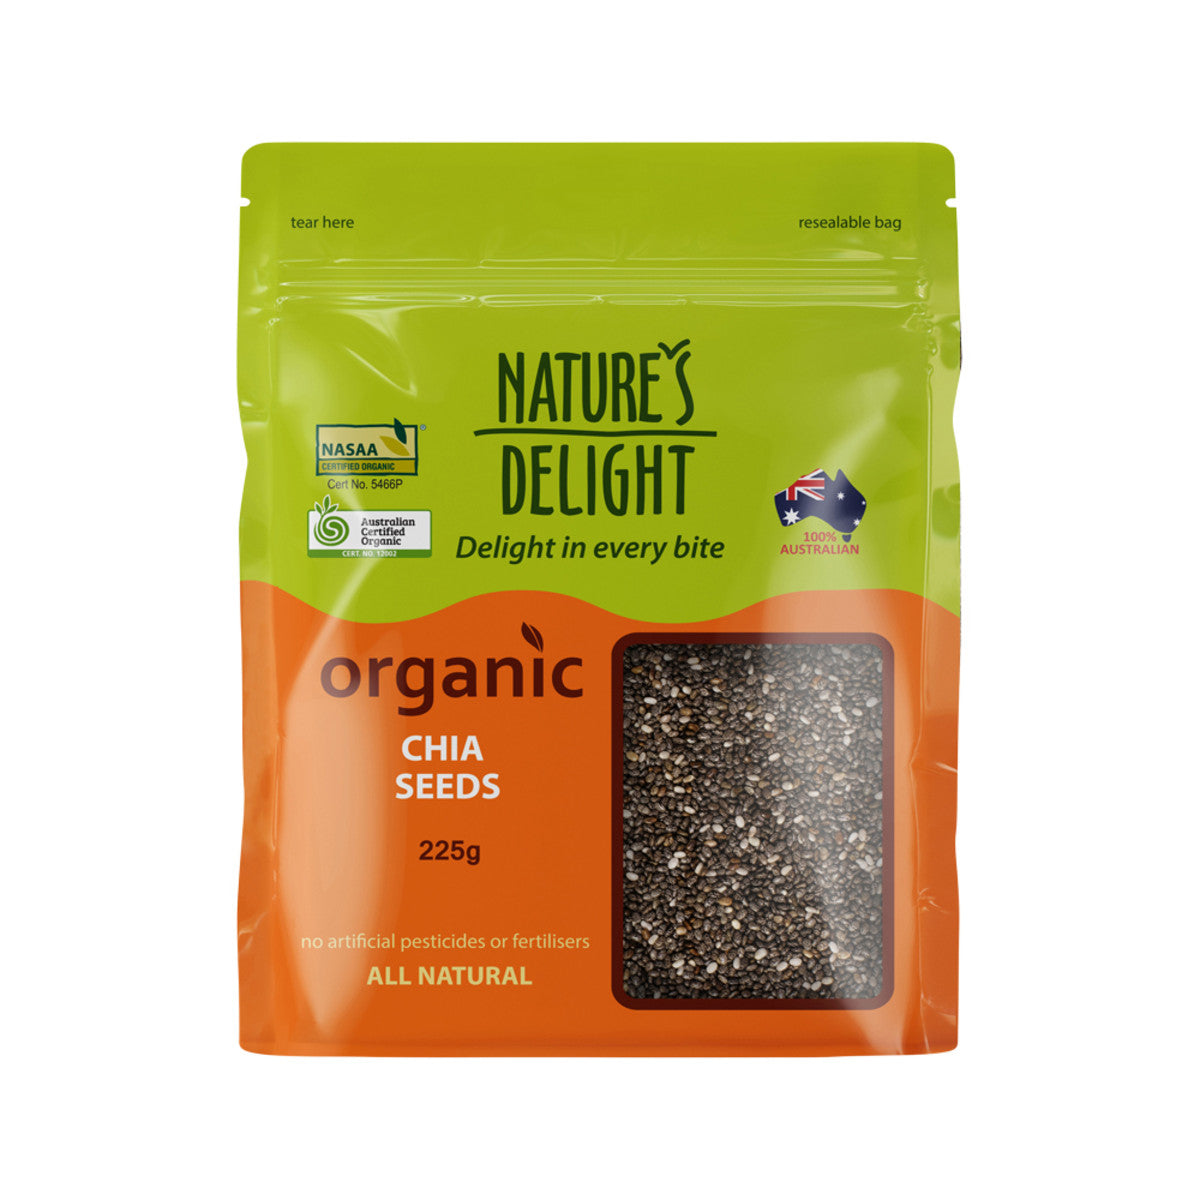 Natures Delight - Organic Chia Seeds